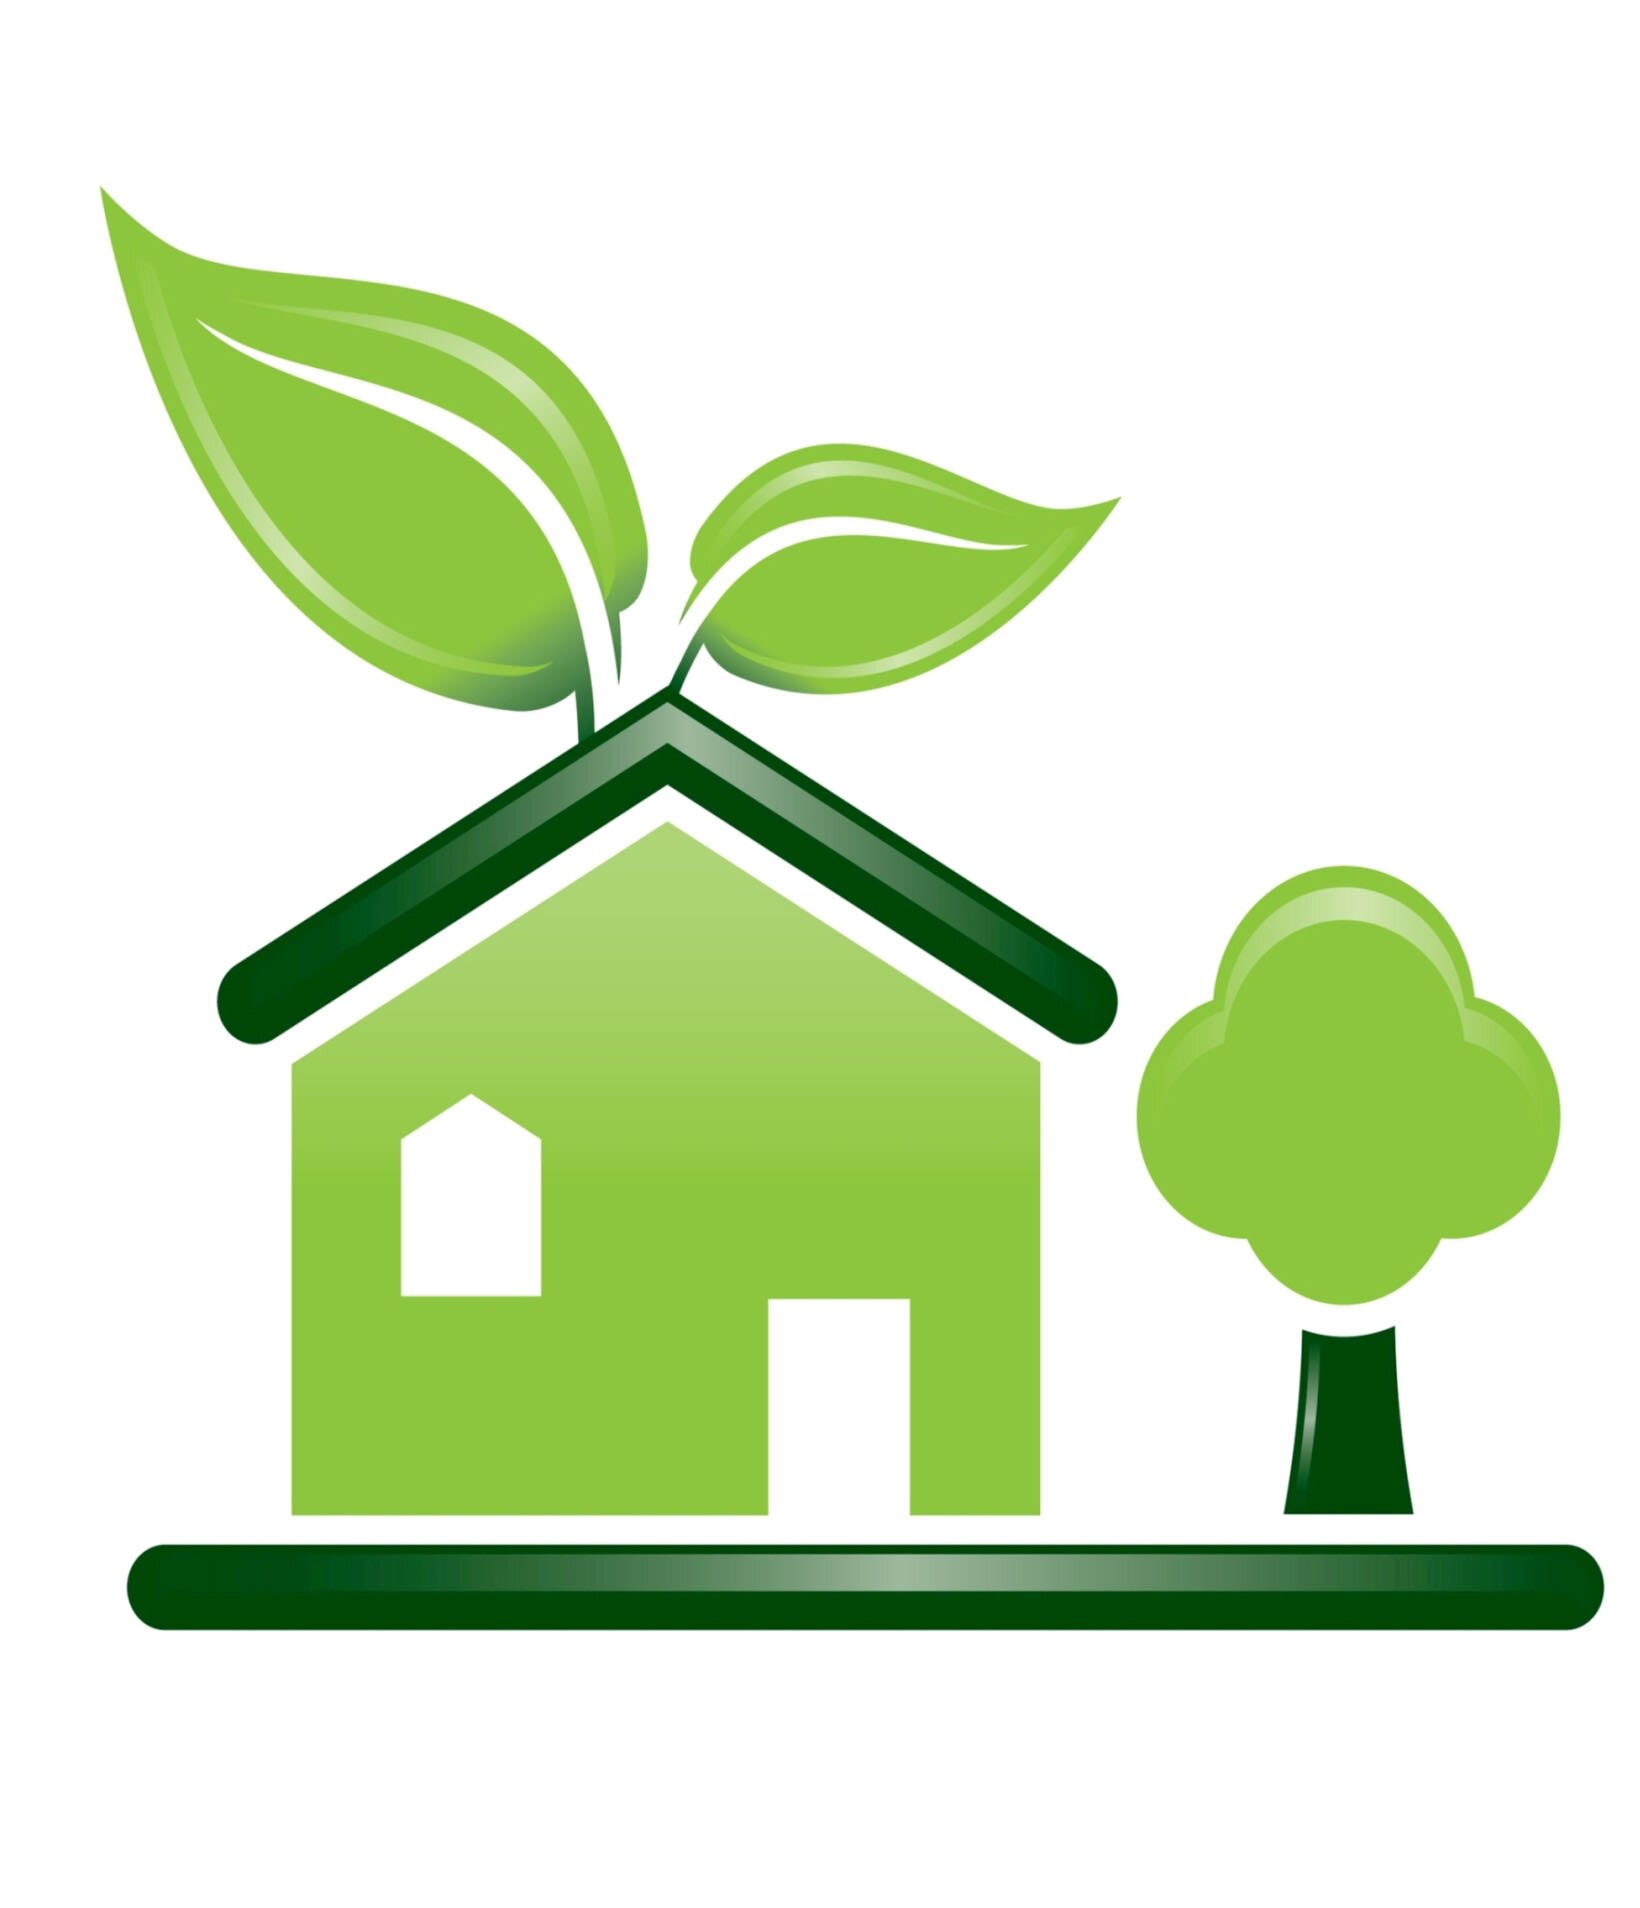 Naturally Green Limited is a renewable energy company offering Renewable Investments to domestic and commercial customers. Naturally Green operates nationwide.